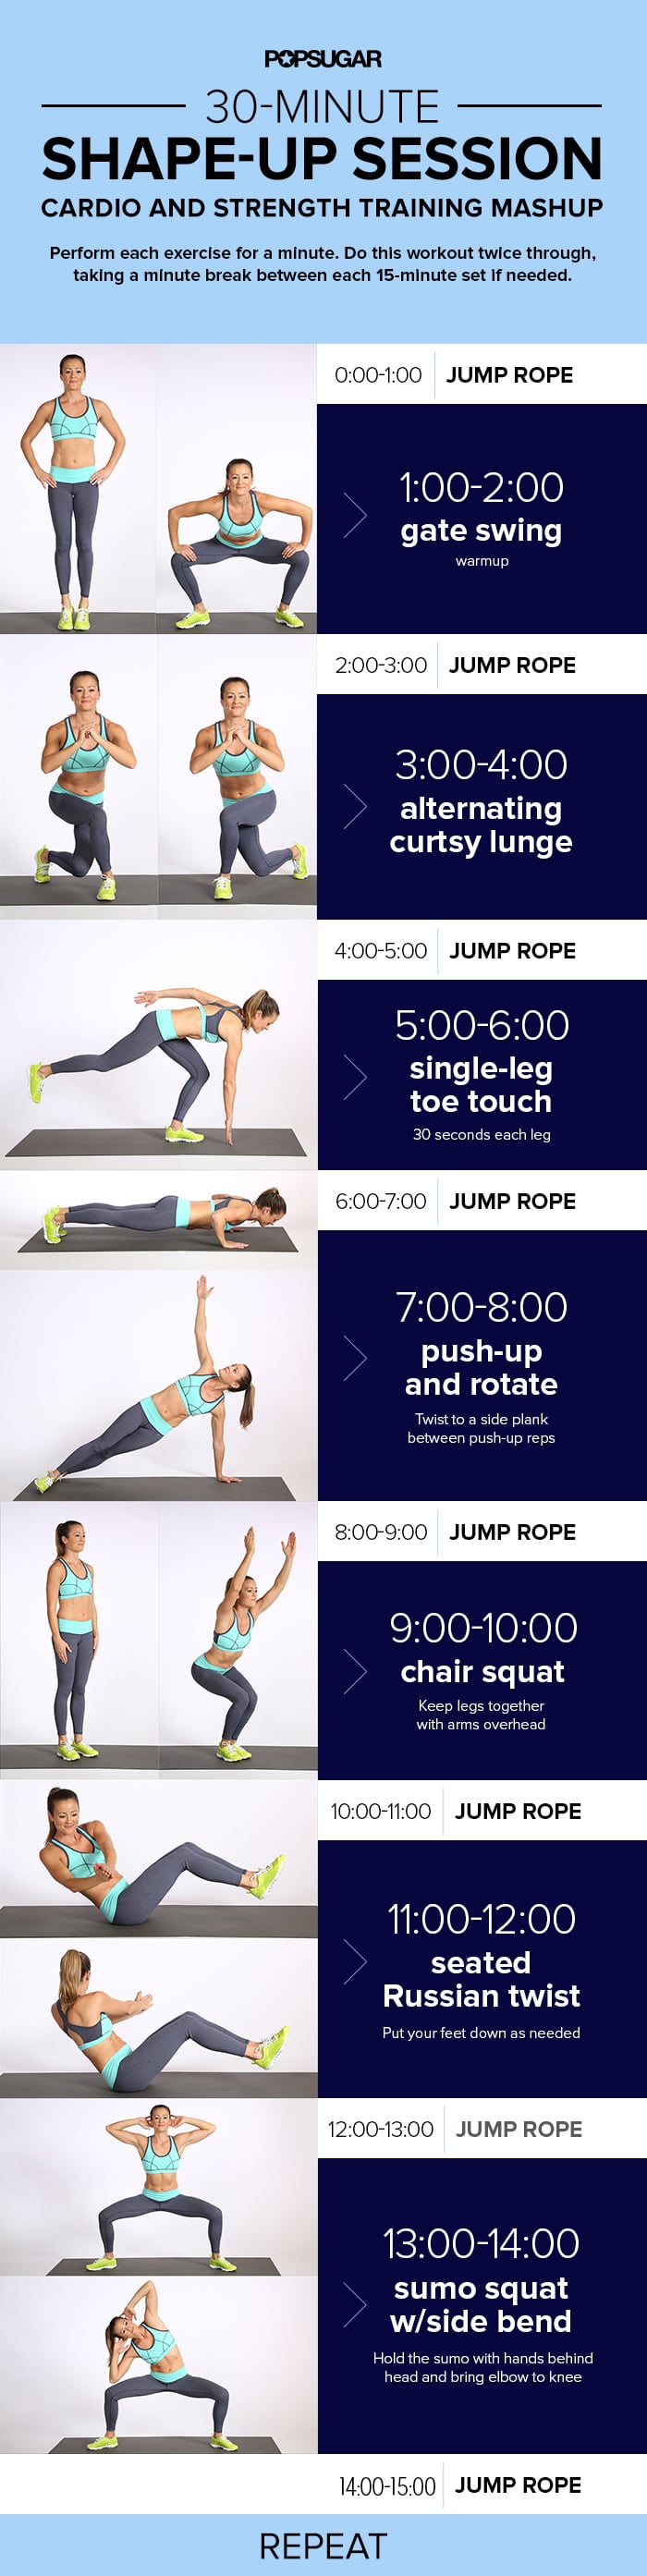 30-Minute Cardio Workout: Endurance, Strength, & Weight Loss